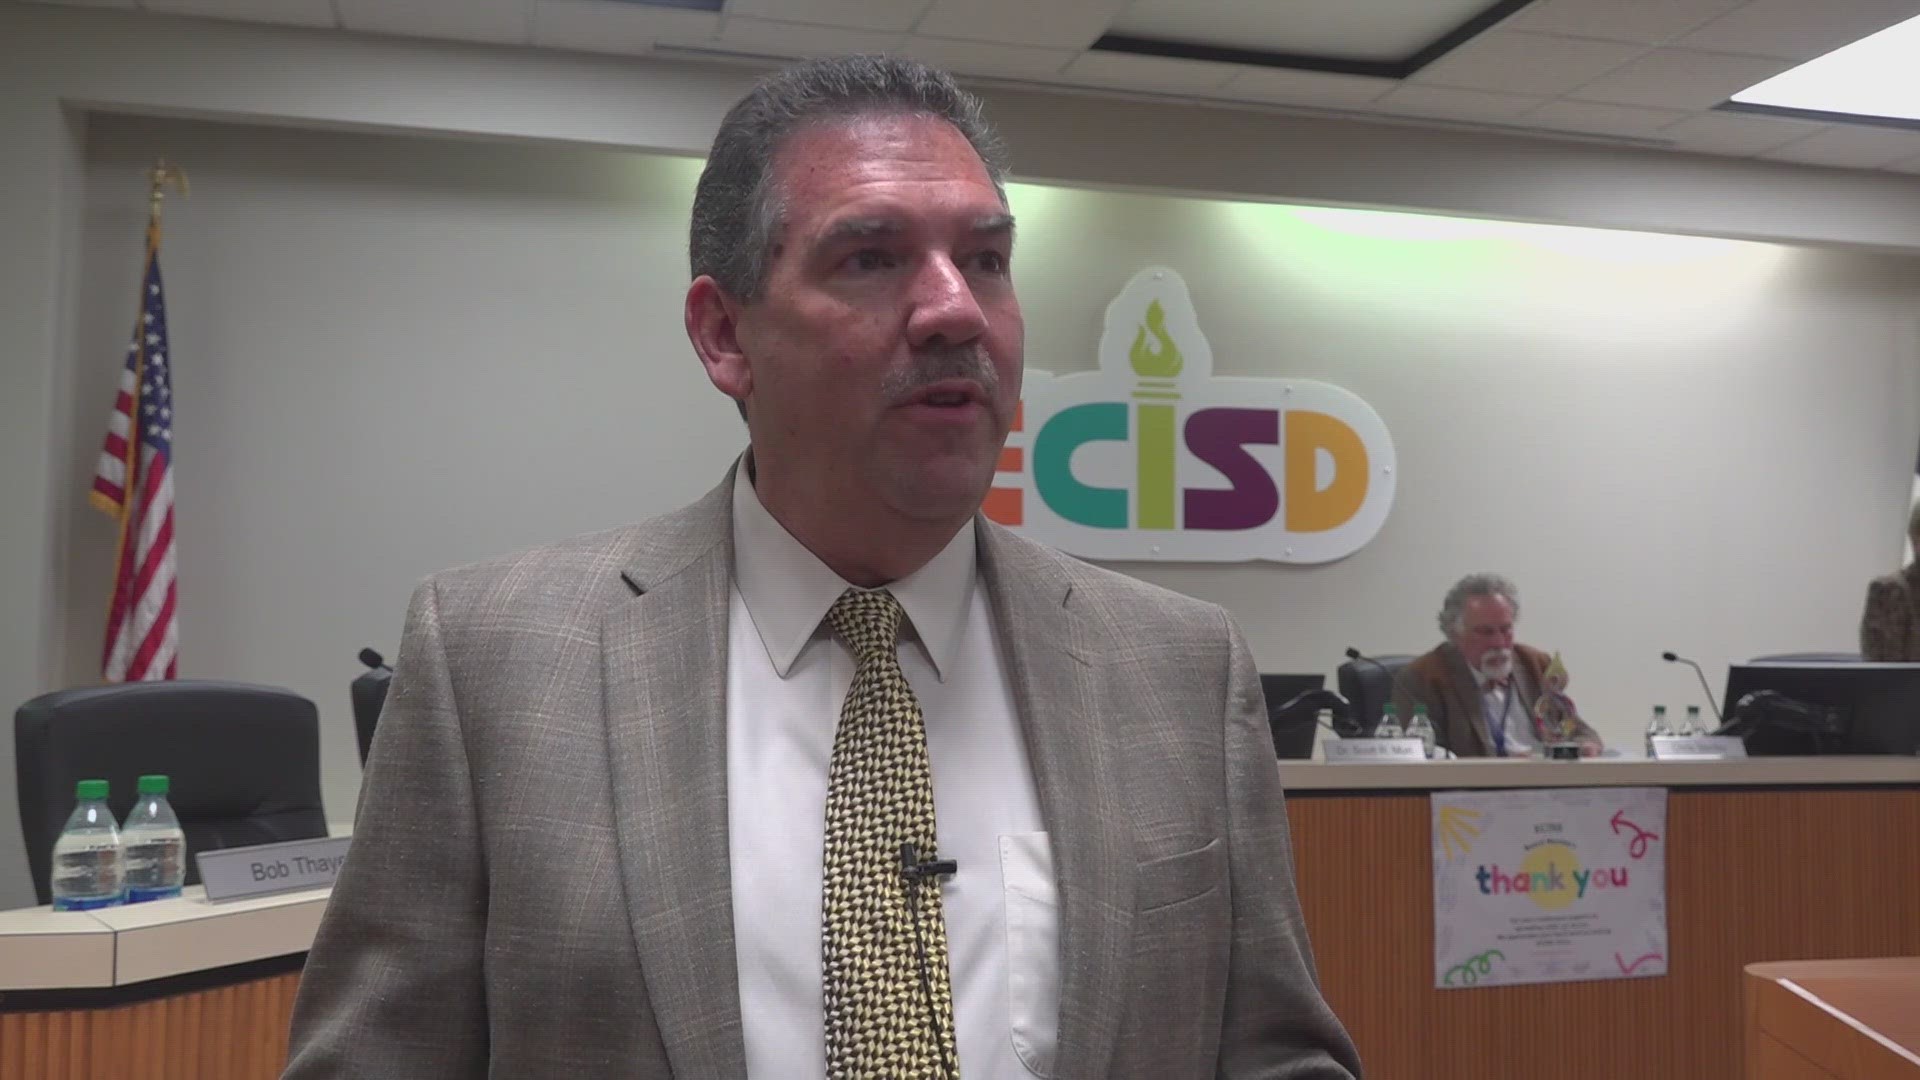 DRTx filed a complaint Tuesday saying ECISD failed to meet federally mandated timelines for evaluating students with disabilities. ECISD's Dr. Muri responded.